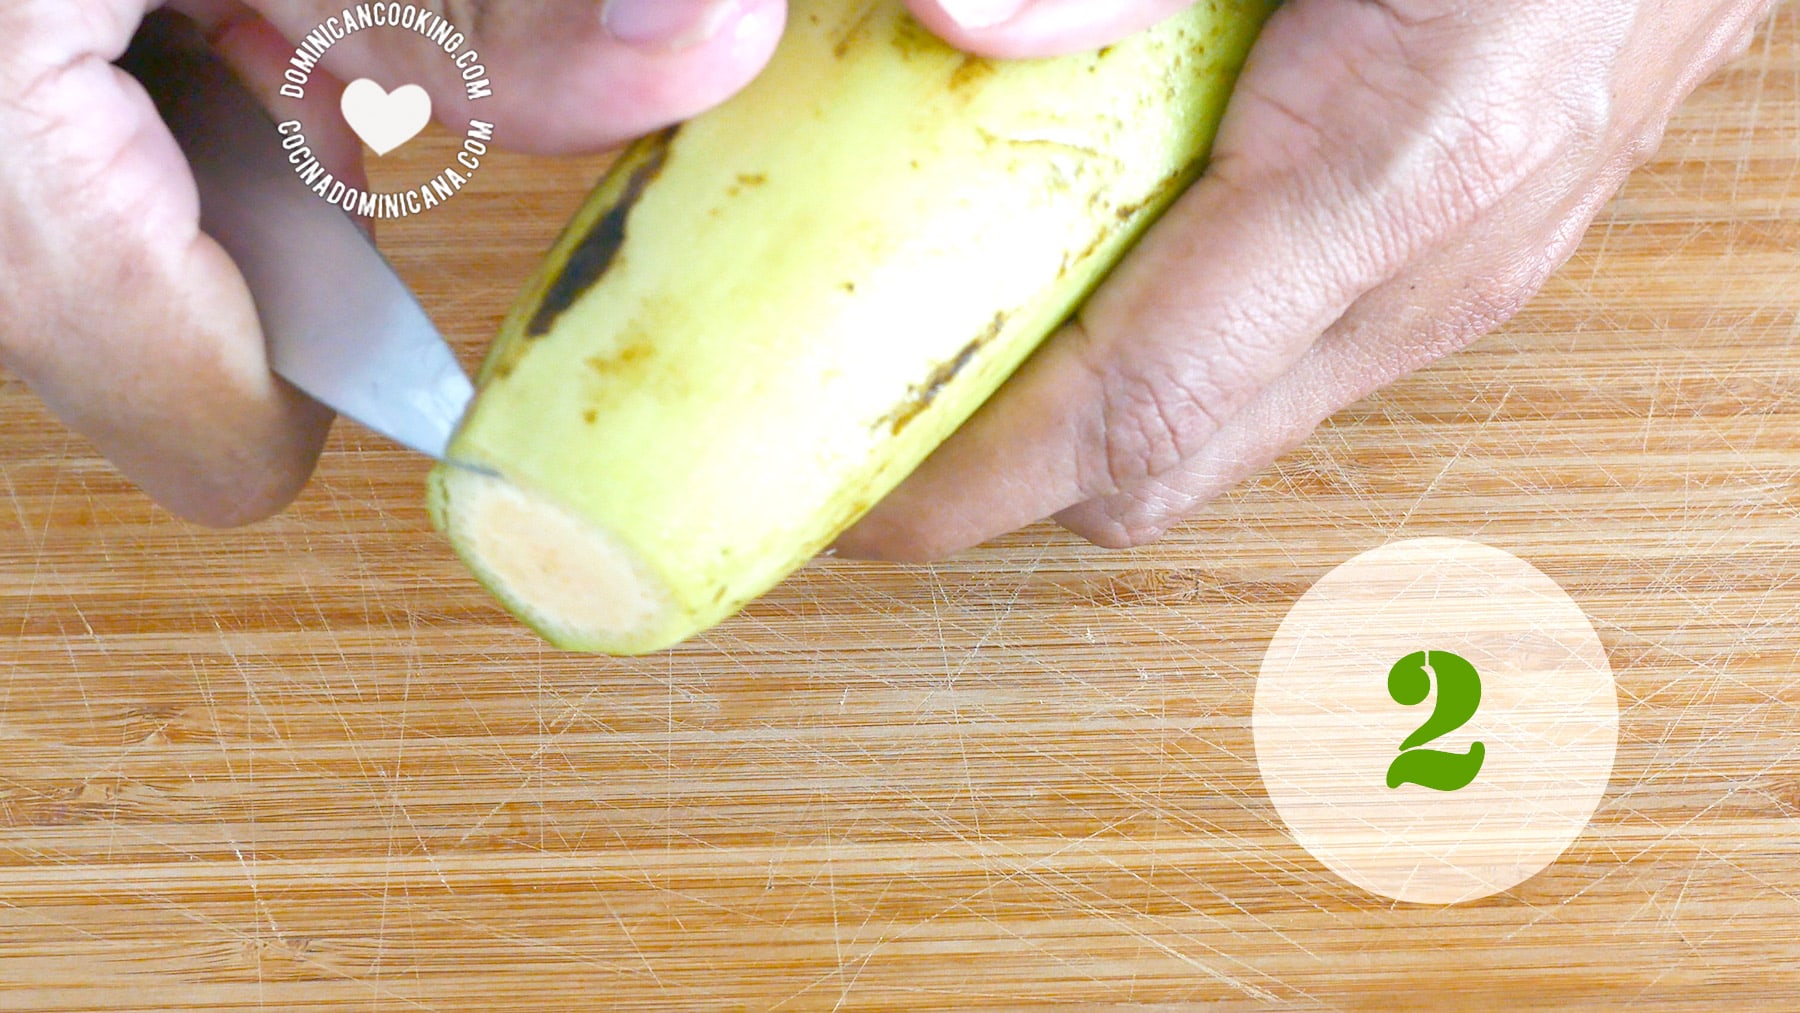 How to peel plantains